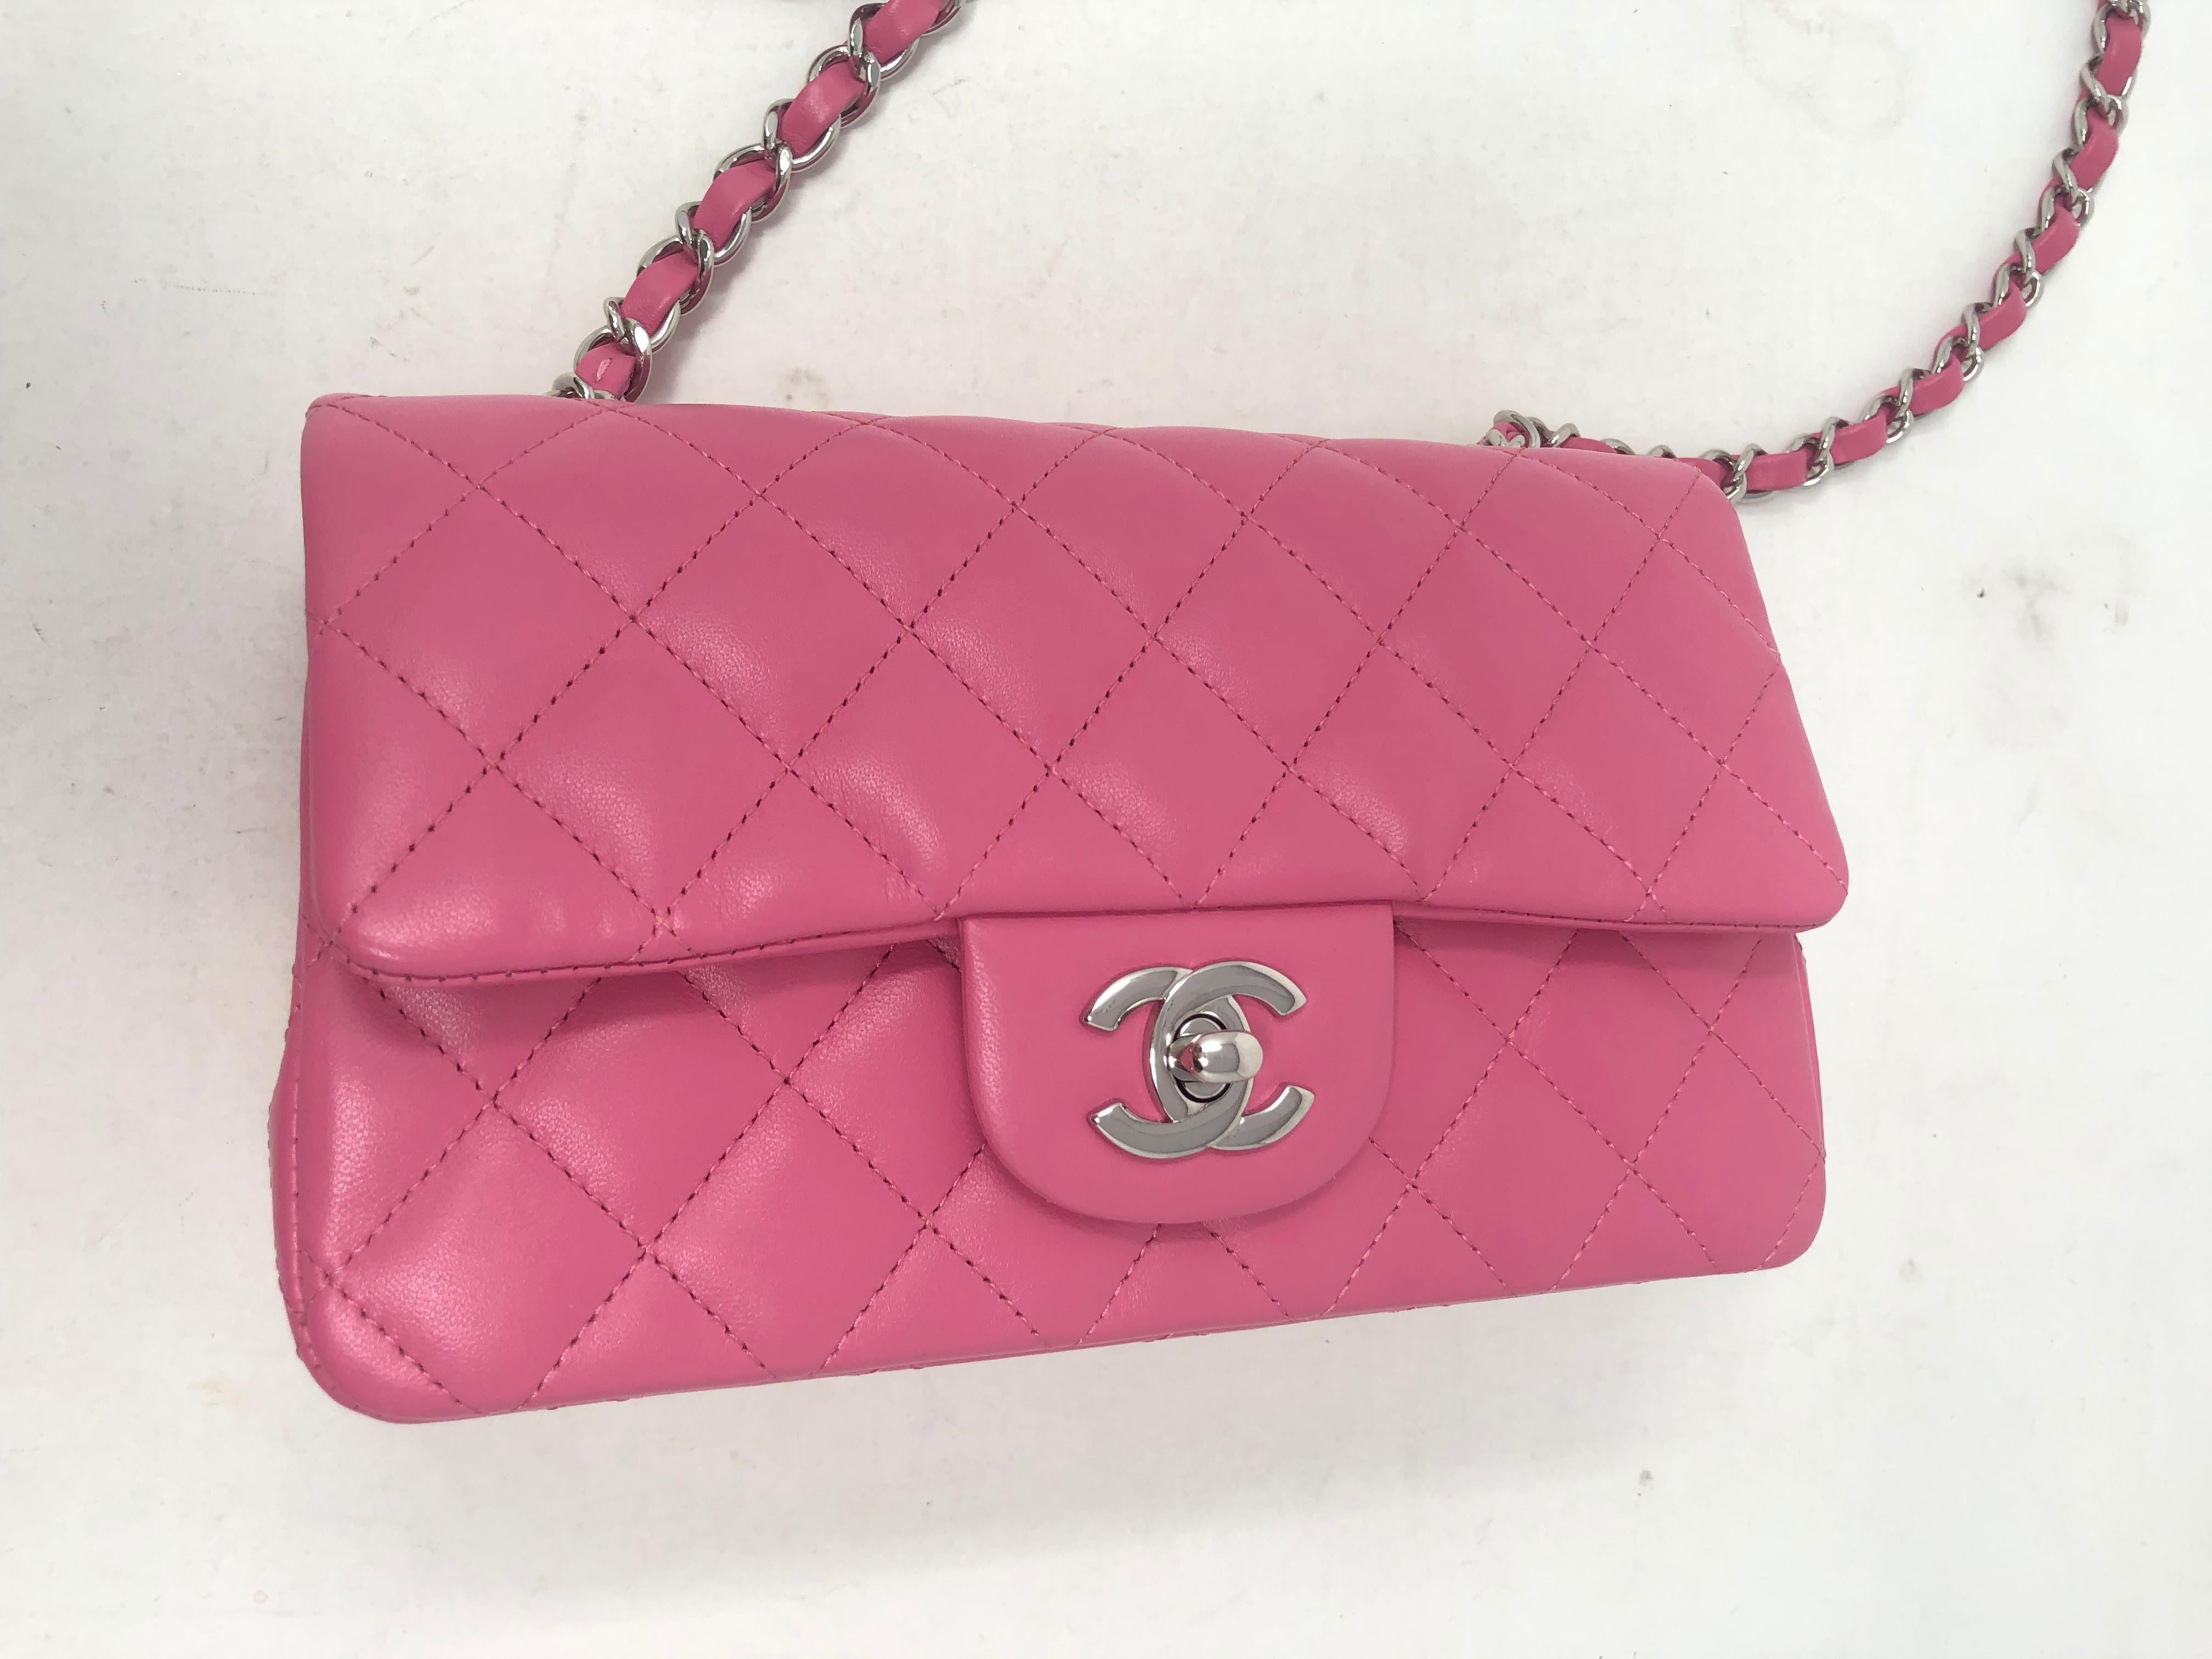 Chanel Hot Pink Lambskin Mini Crossbody Bag. Mint like brand new condition. Fun pop of bubblegum pink color. Silver hardware. Rare color and size. Mini bags are the rage. Collector's piece. Authenticity card included with Chanel dust cover.